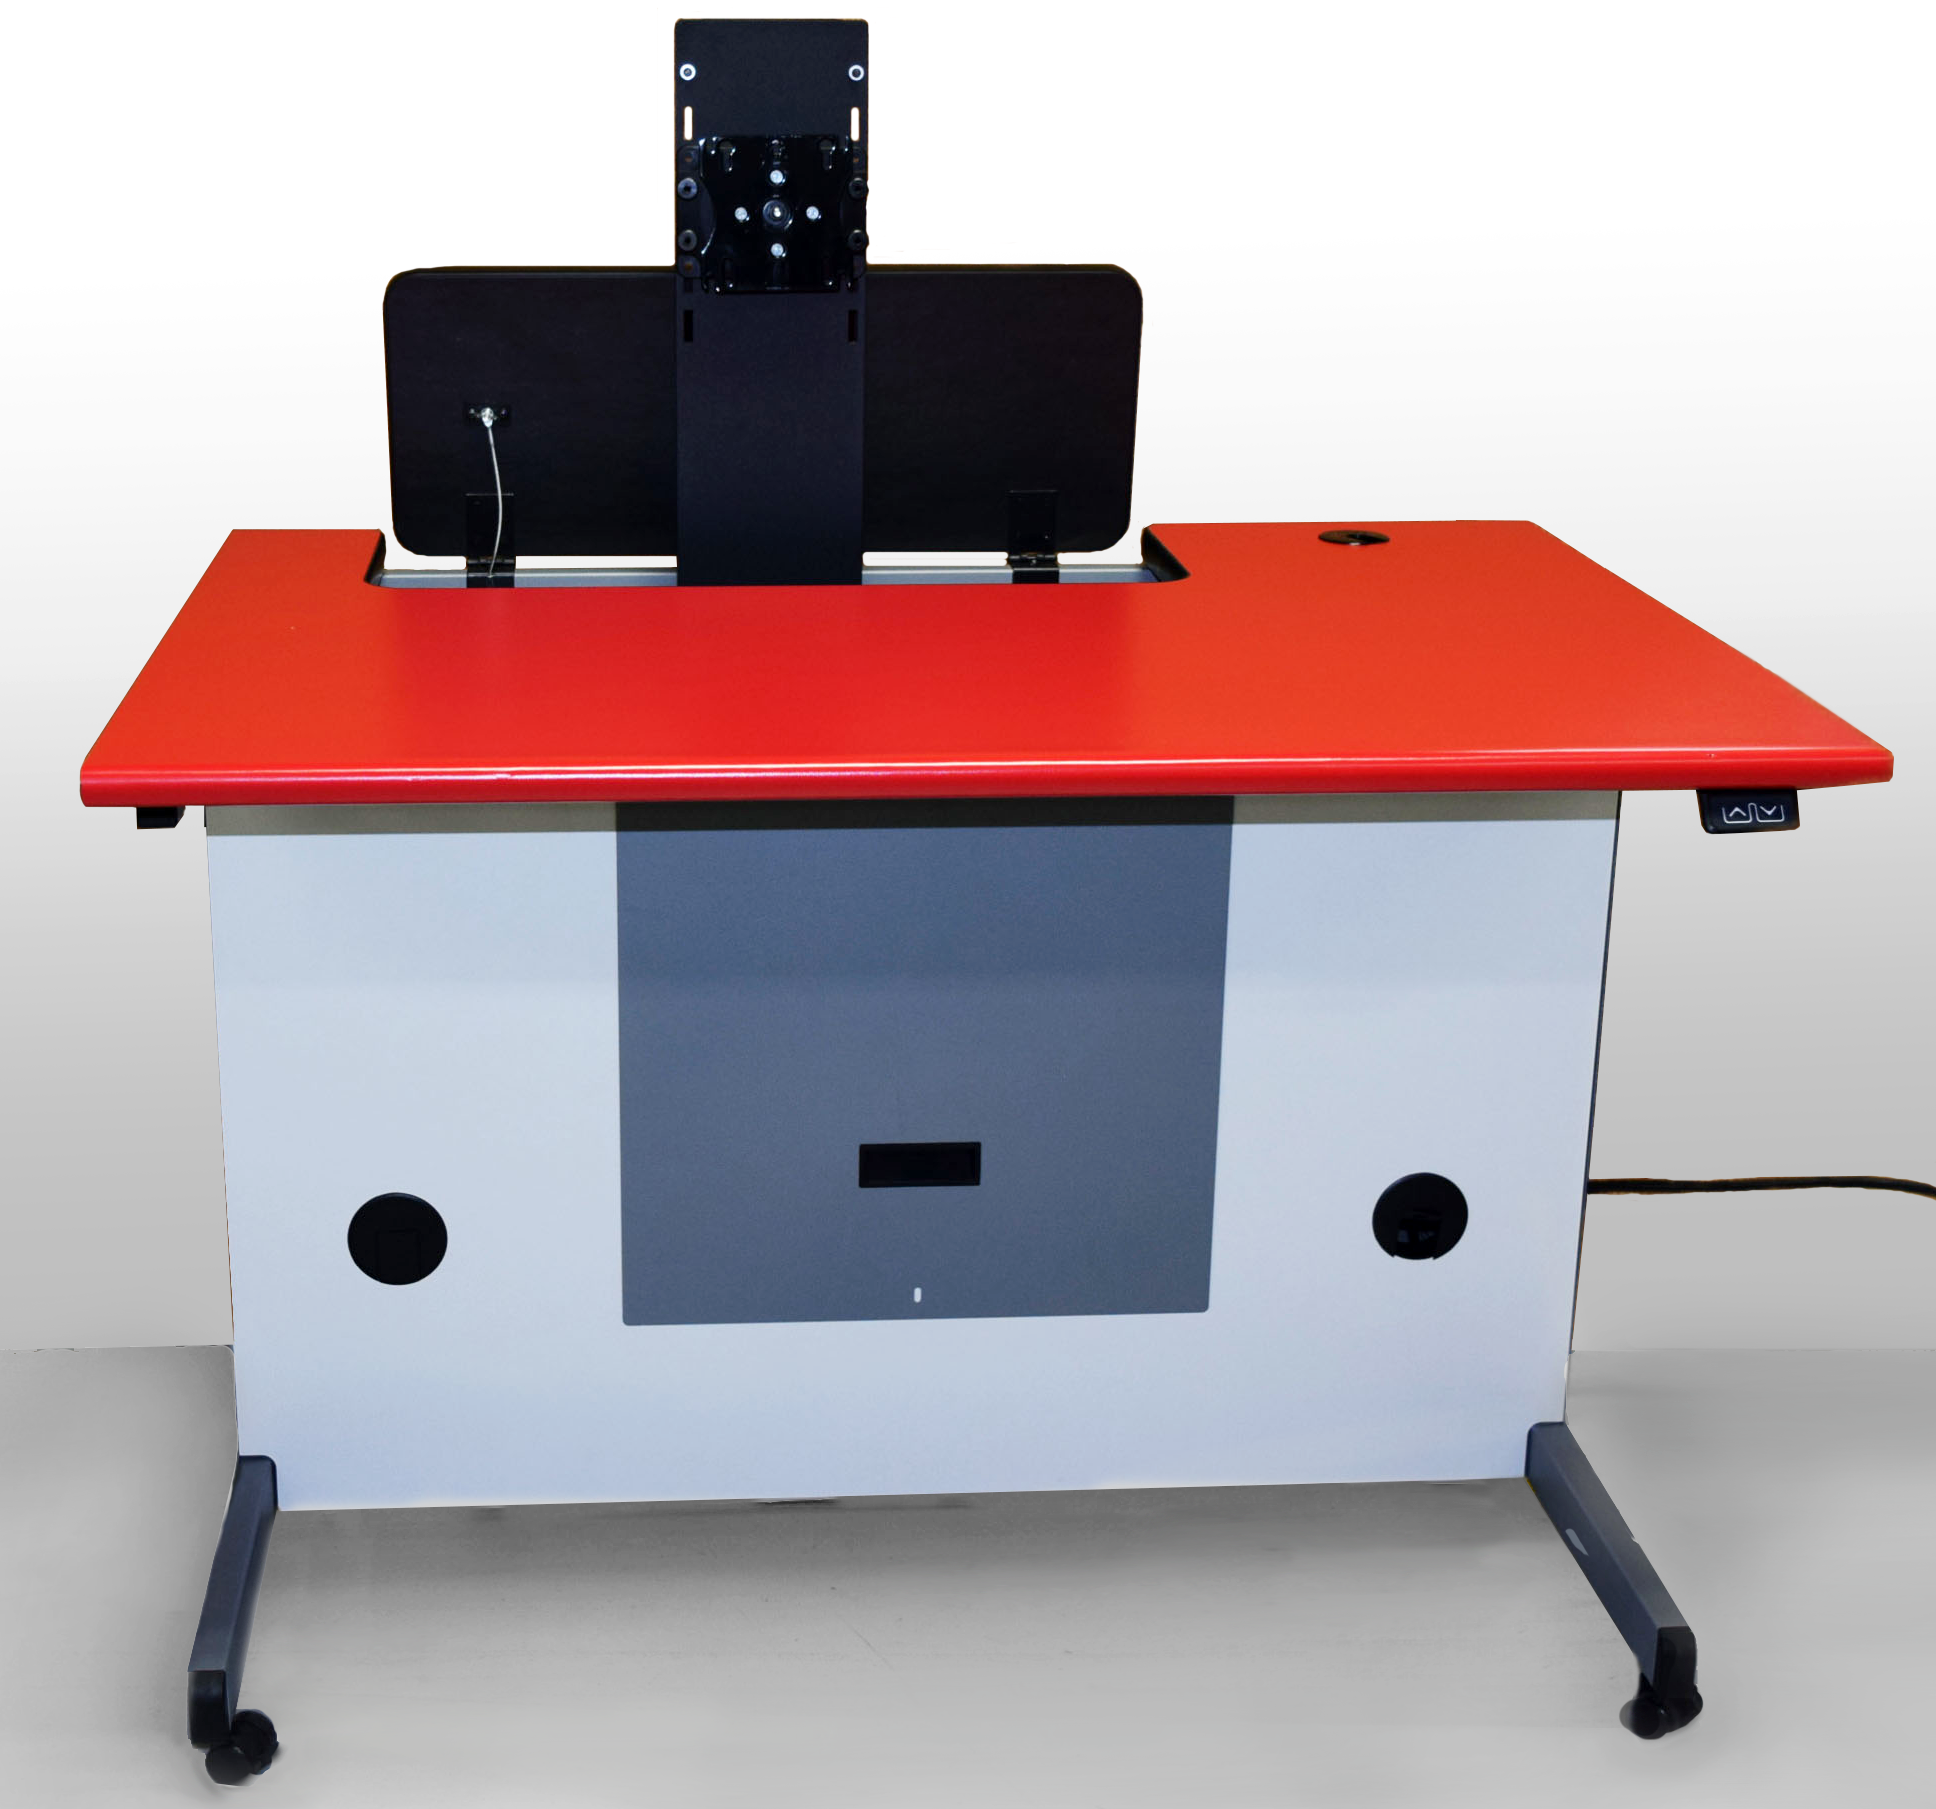 Single Monitor Motorized Desk by Line of Sight - ChairTech